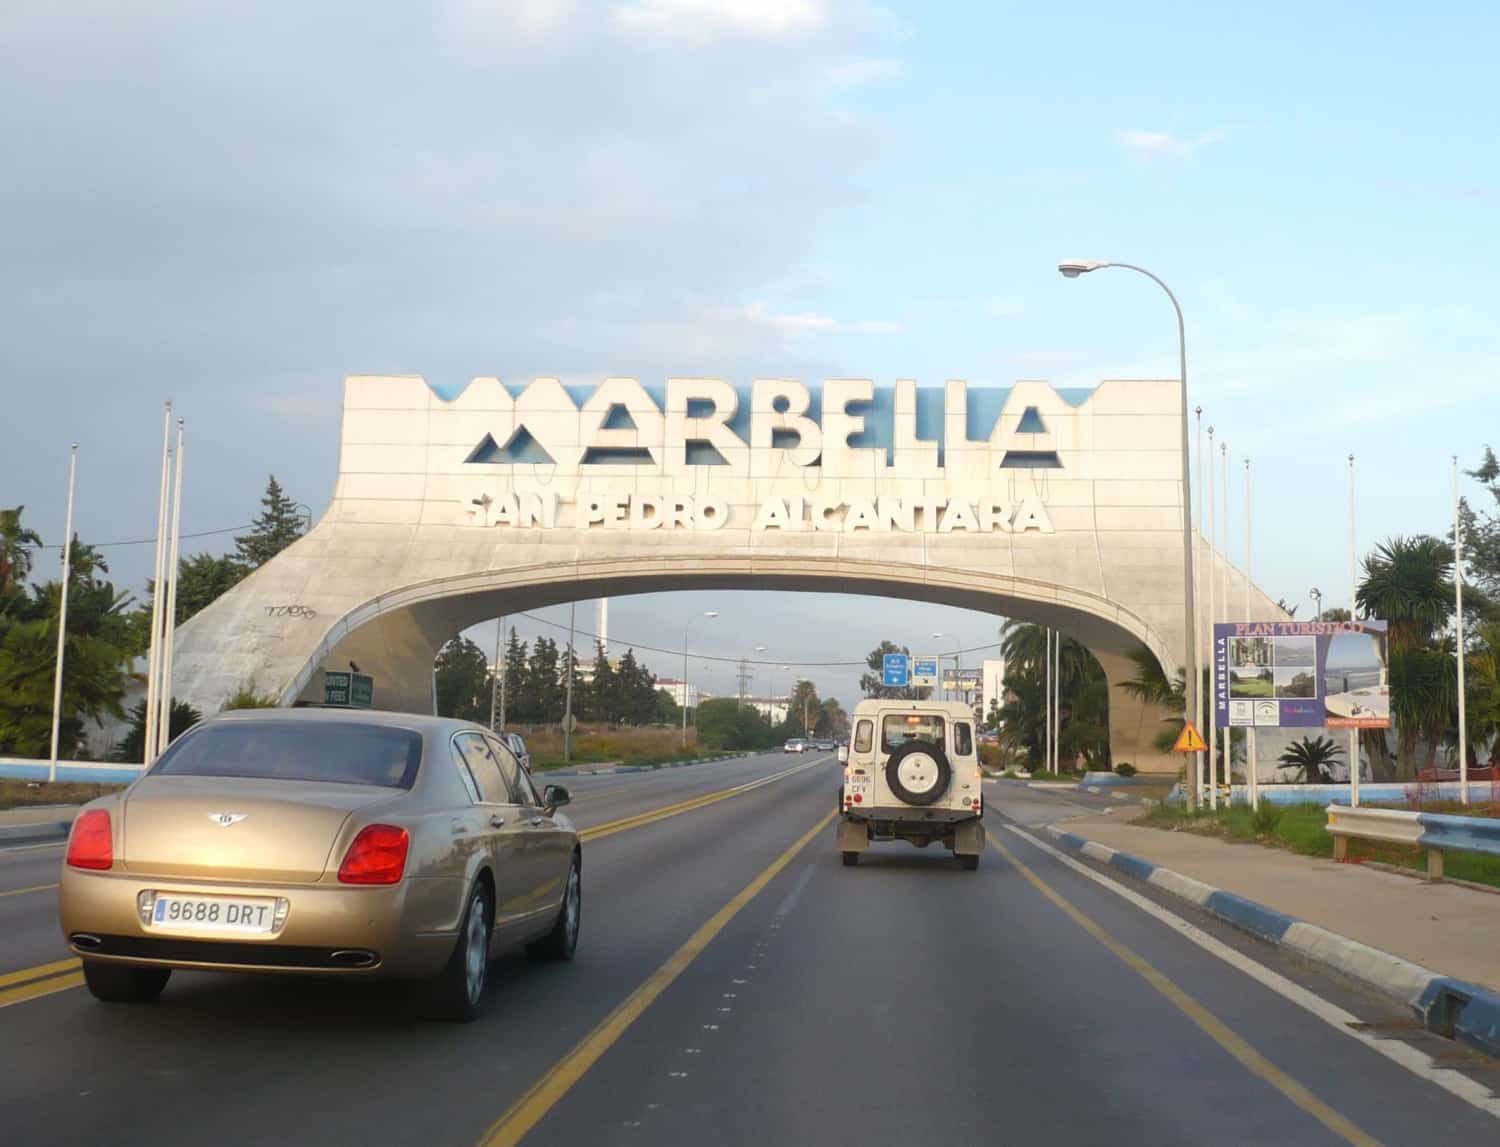 welcome to Marbella